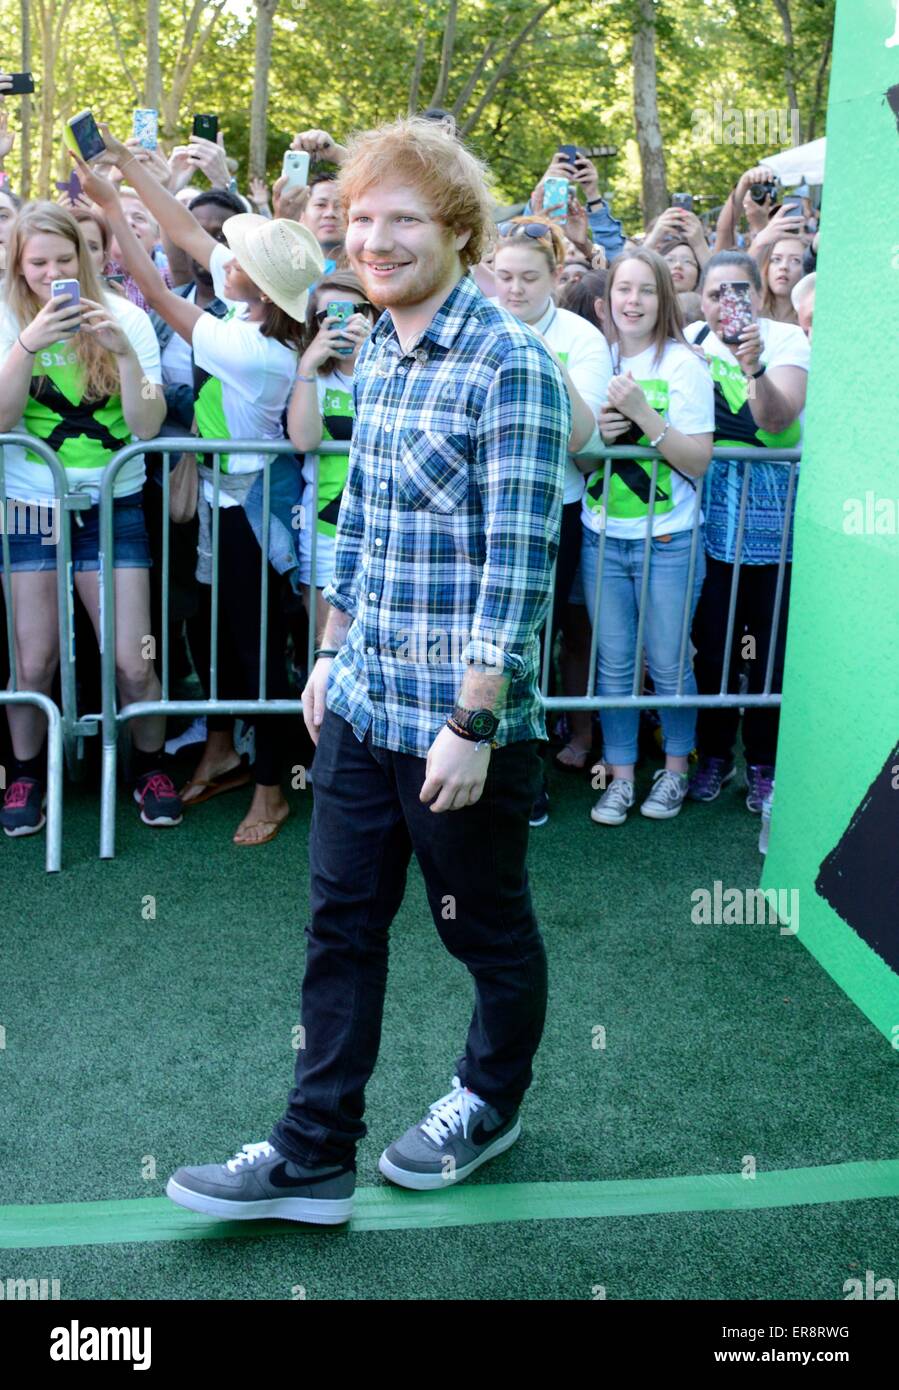 New York, NY, USA. 29th May, 2015. Ed Sheeran on stage for ABC's Good  Morning America (GMA) Fun in the Sun Summer Concert Series with Ed Sheeran,  Rumsey Playfield in Central Park,